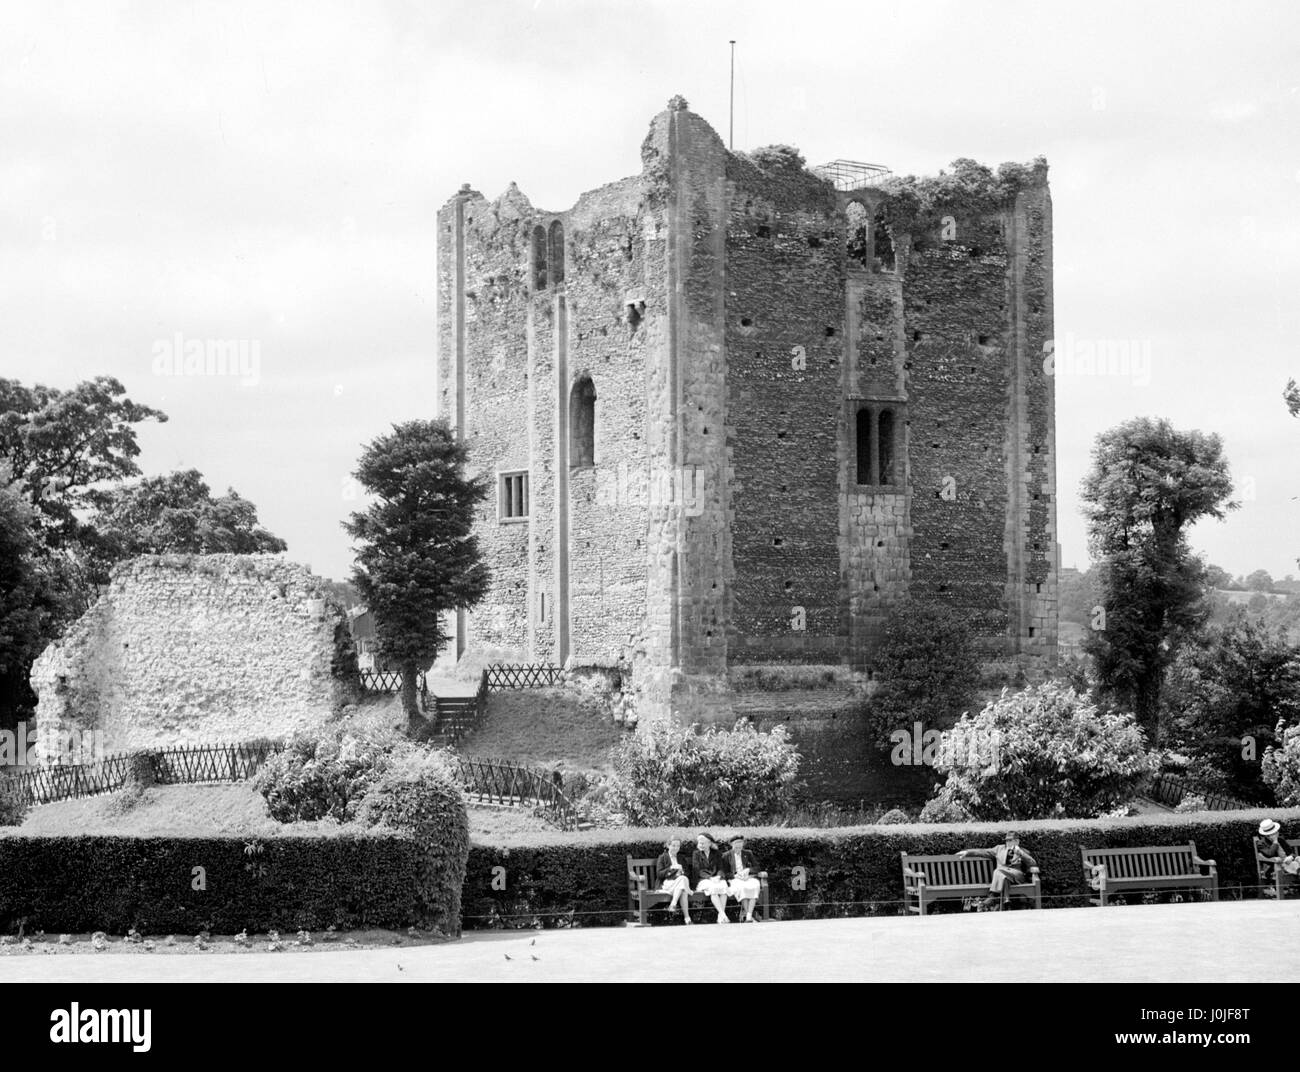 The Castle Keep at Guildford, Surrey, with surrounding gardens. Stock Photo